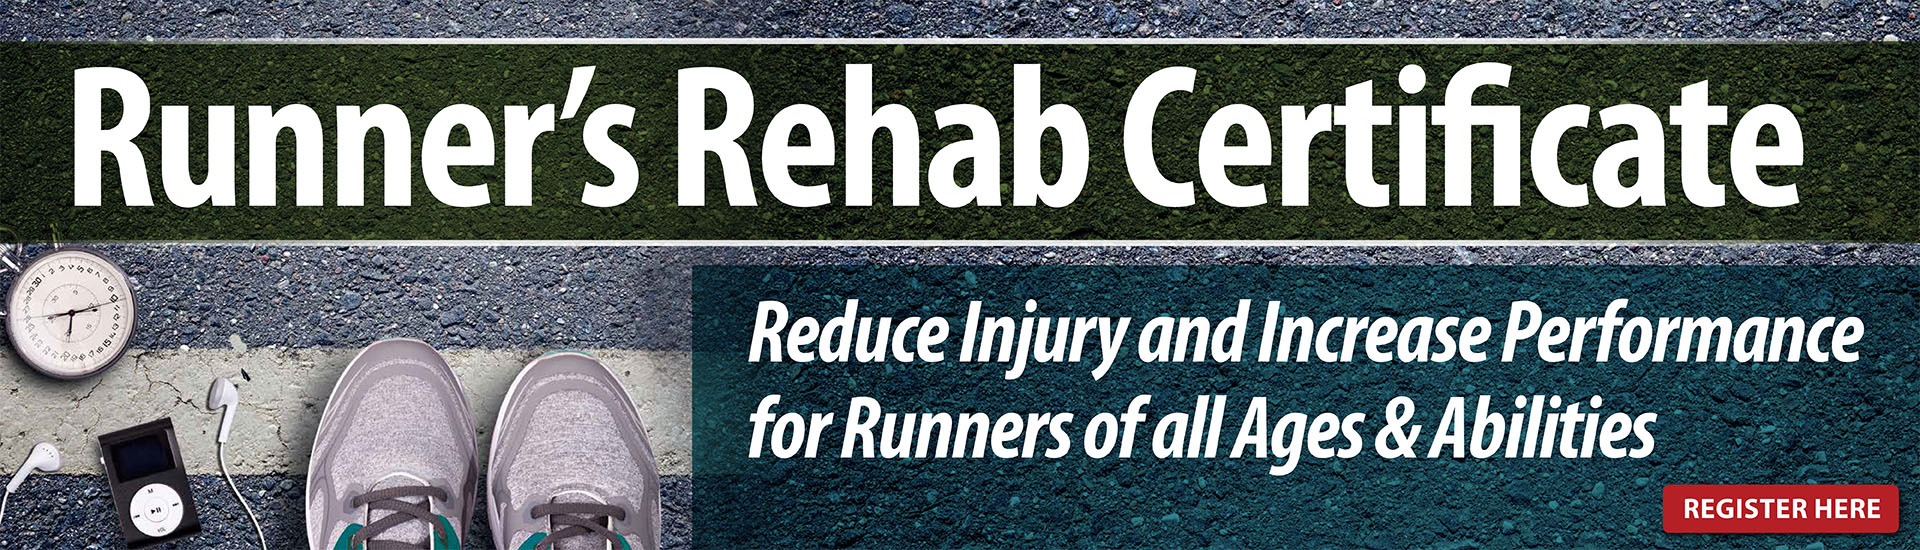 Runner’s Rehab Certificate: Reduce Injury and Increase Performance for Runners of all Ages & Abilities